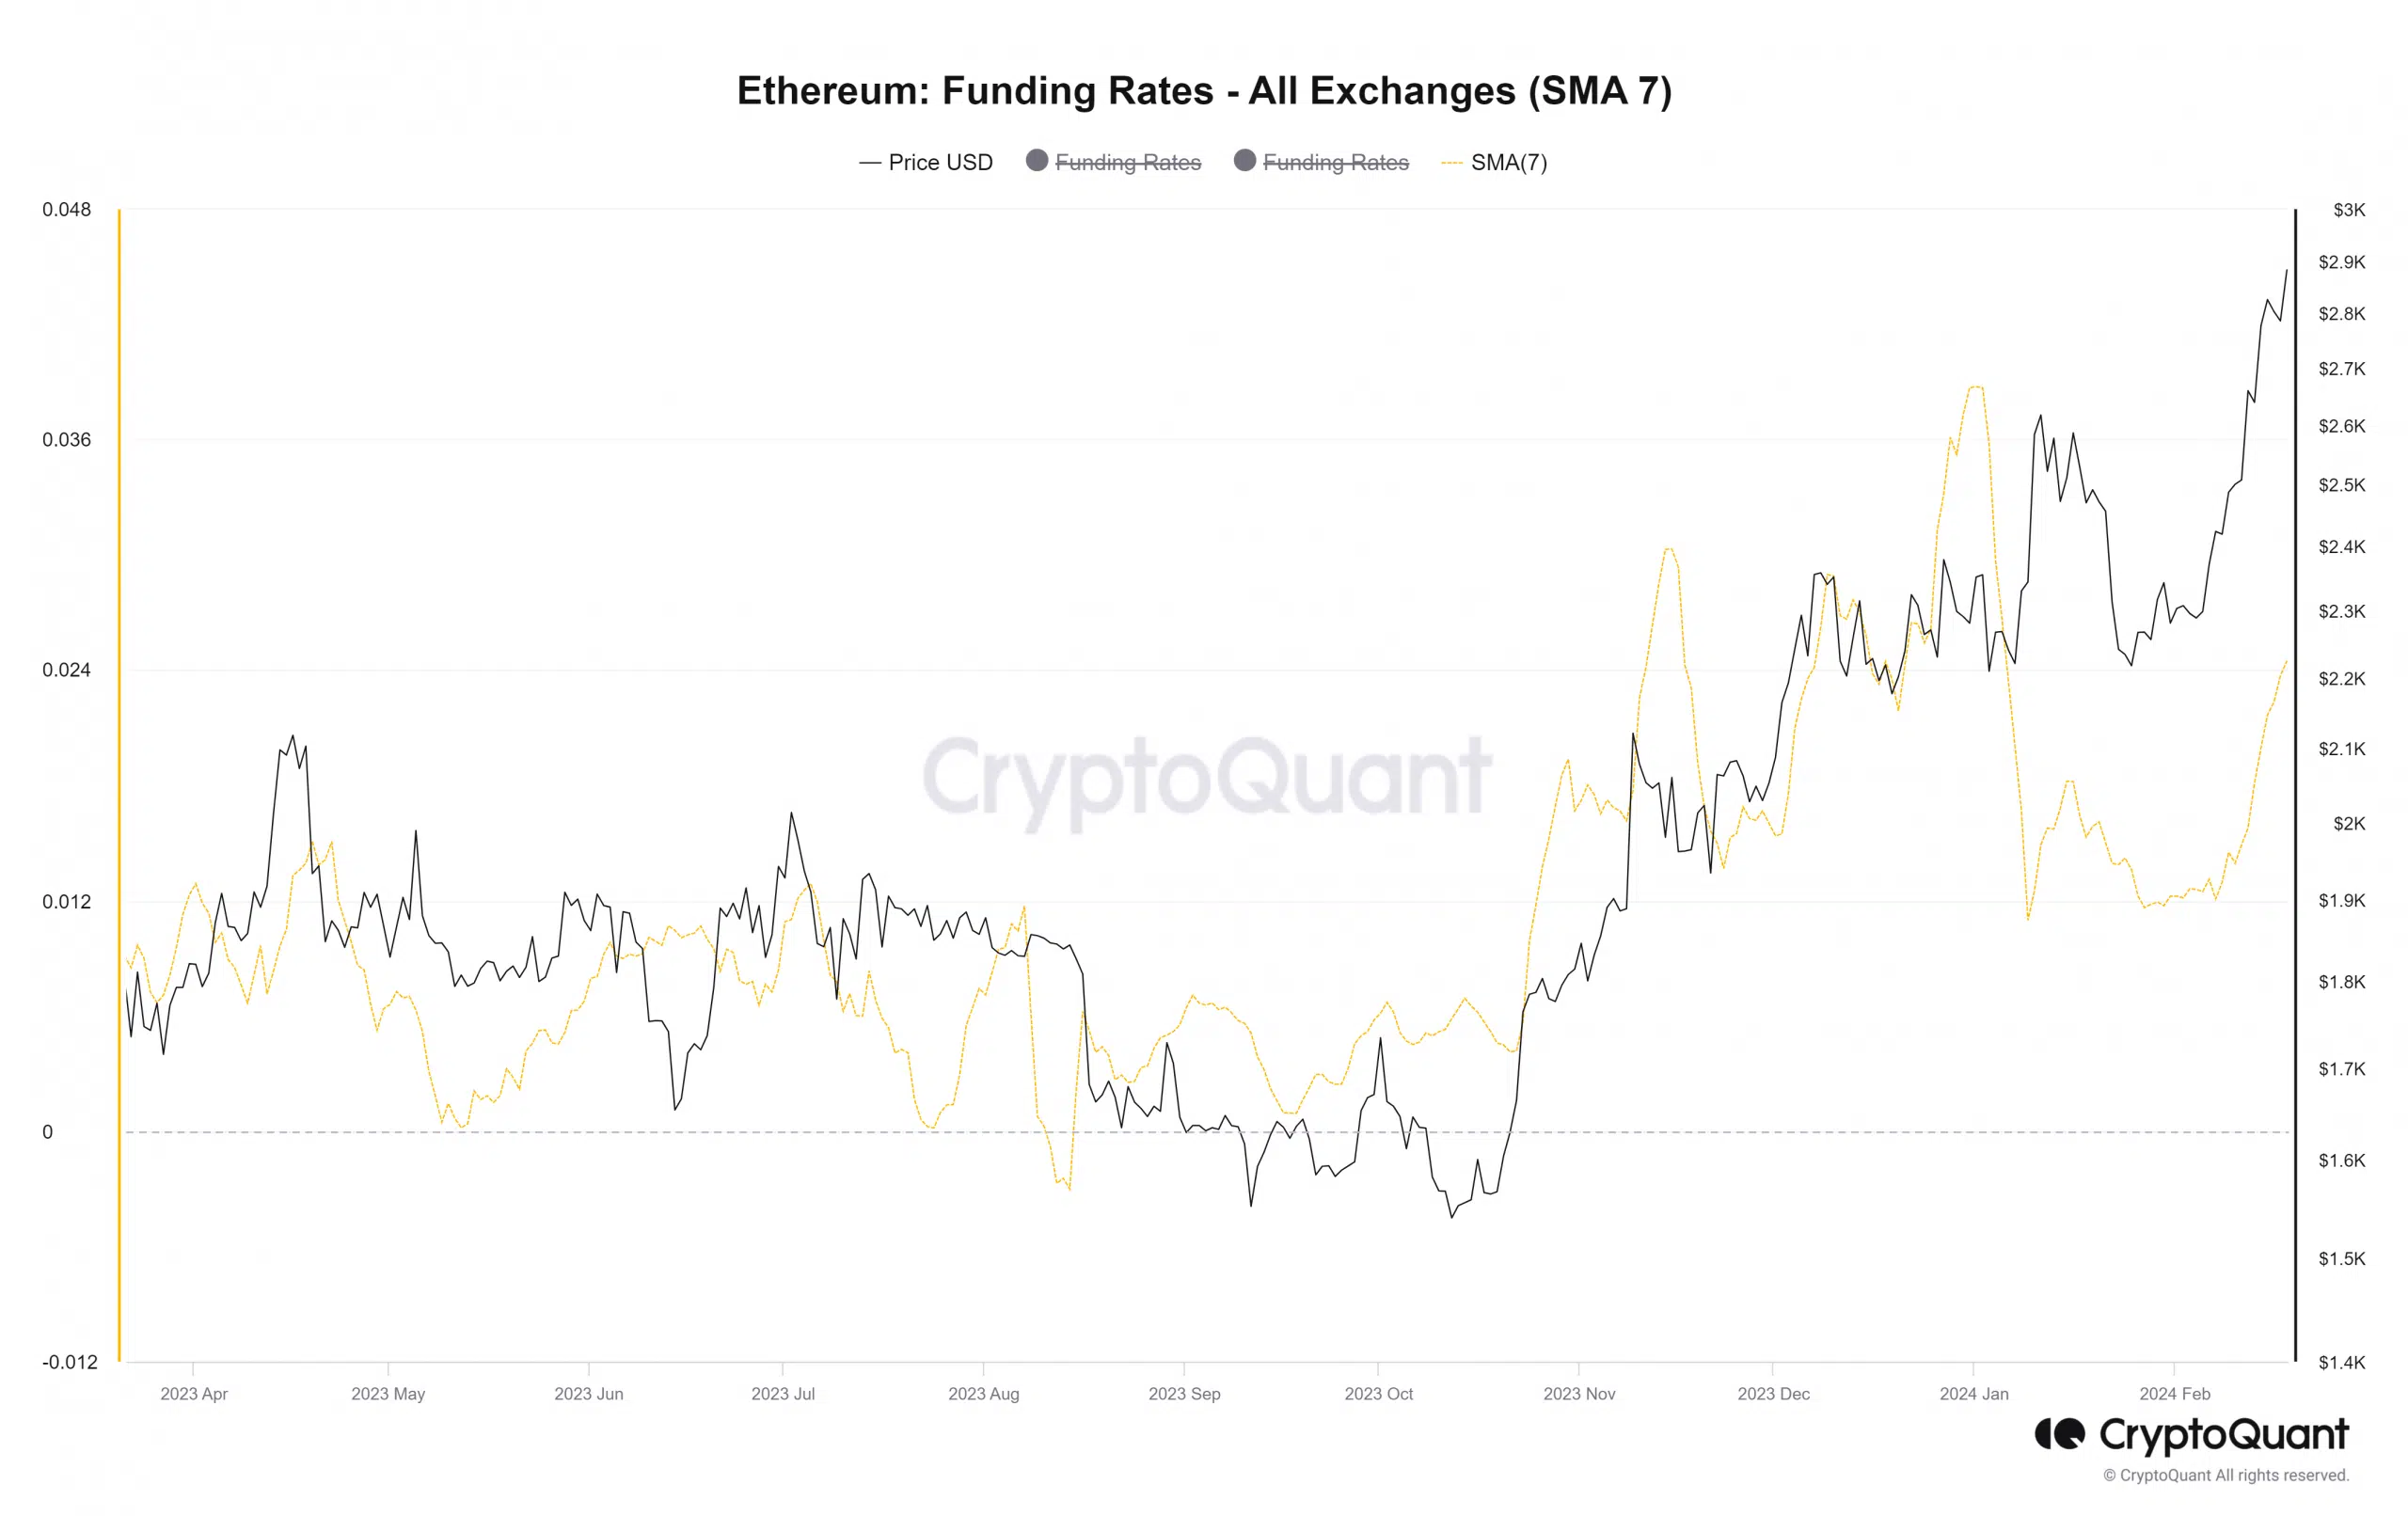 ETH Funding Rate